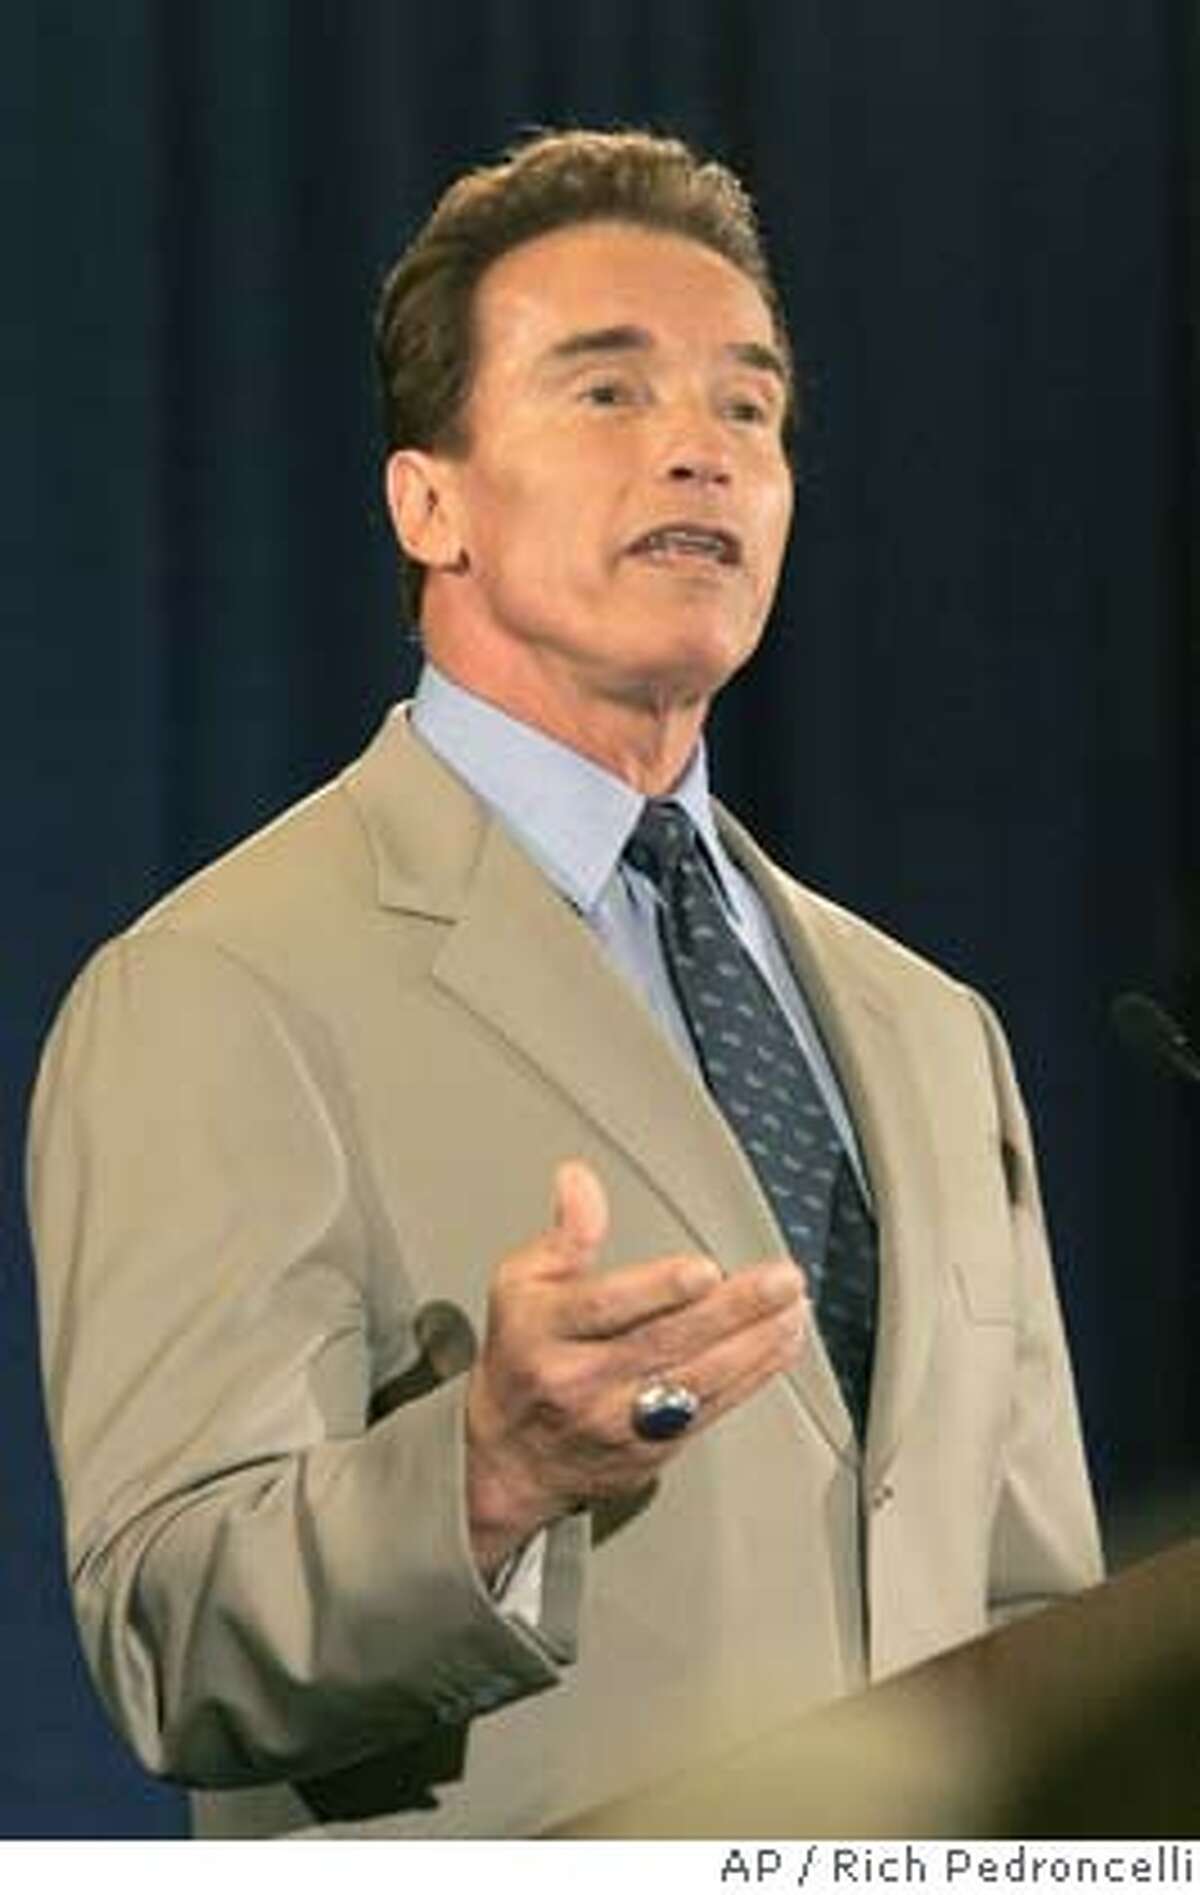 Gov. Arnold Schwarzenegger announces that he wants to restore $1.3 billion in funding to transporation, while speaking before the League of California Cities, in Sacramento, Calif., Wednesday, May 11, 2005. Saying the Calfornia economy has improved significantly in recent months, Schwarzenegger said he would be able to reverse plans made in January to transfer gas tax money to pay for other programs.(AP Photo/Rich Pedroncelli) Ran on: 05-29-2005 Schwarz- enegger Ran on: 05-29-2005 Schwarz- enegger